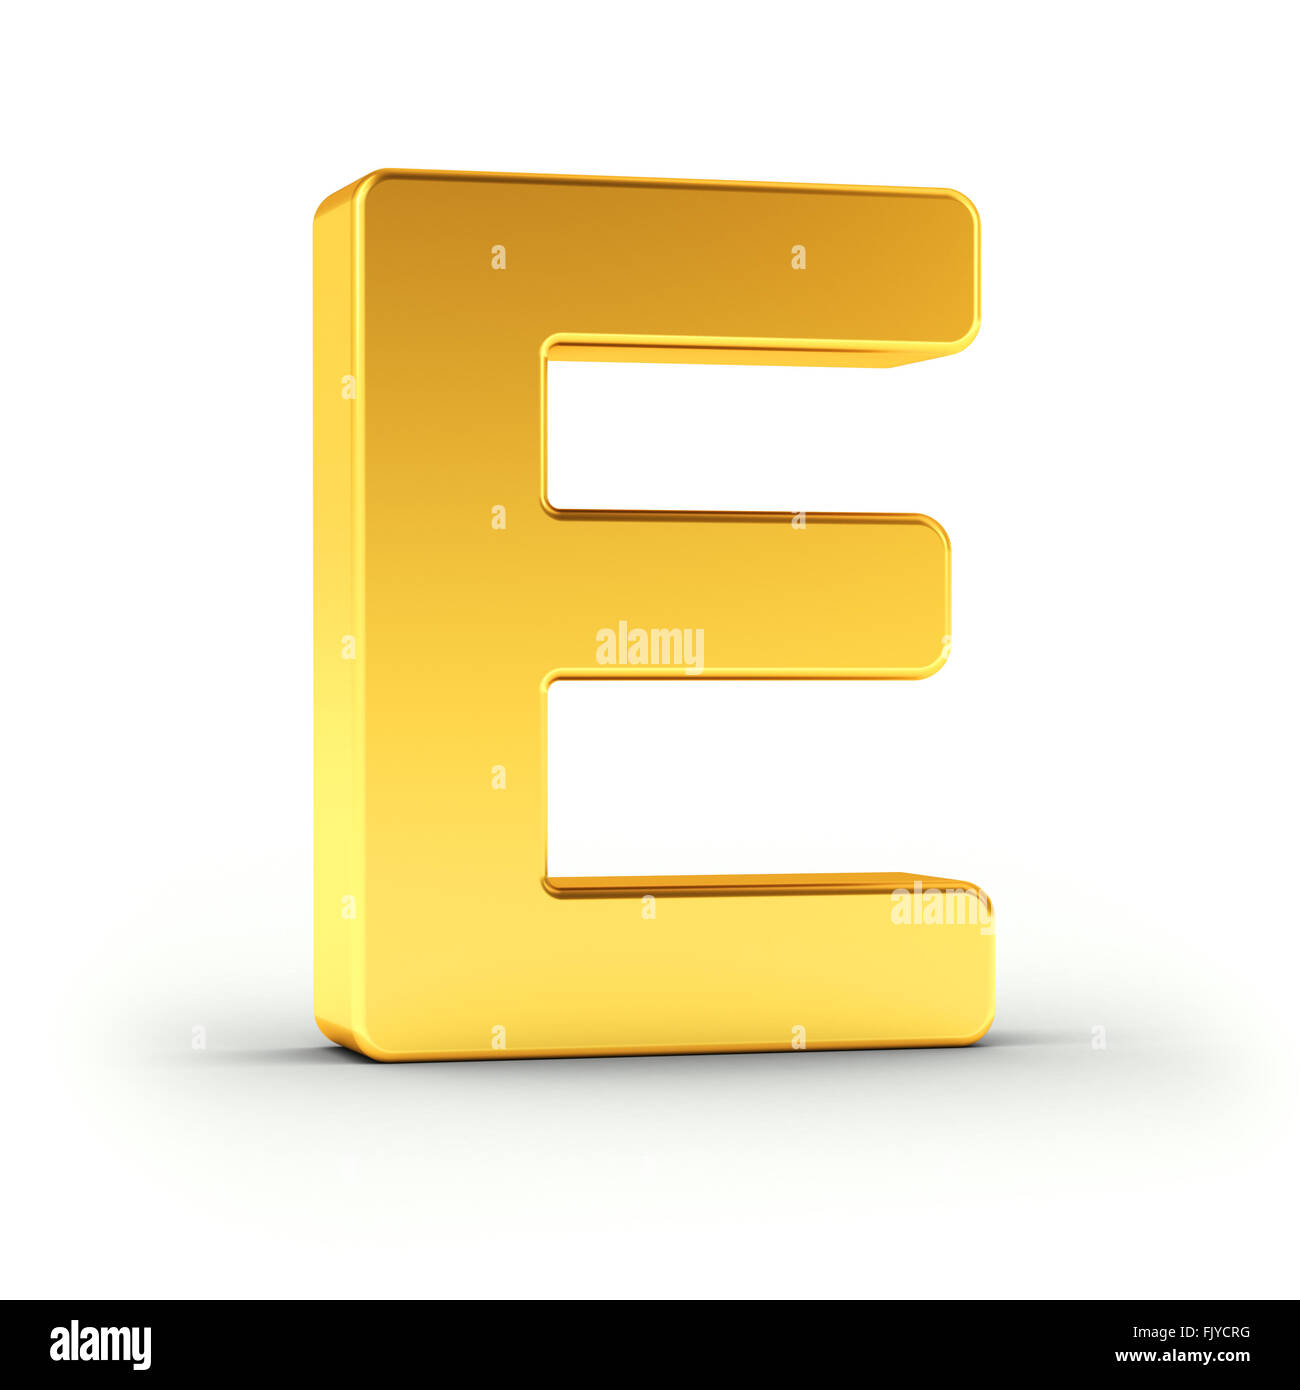 The Letter E as a polished golden object Stock Photo